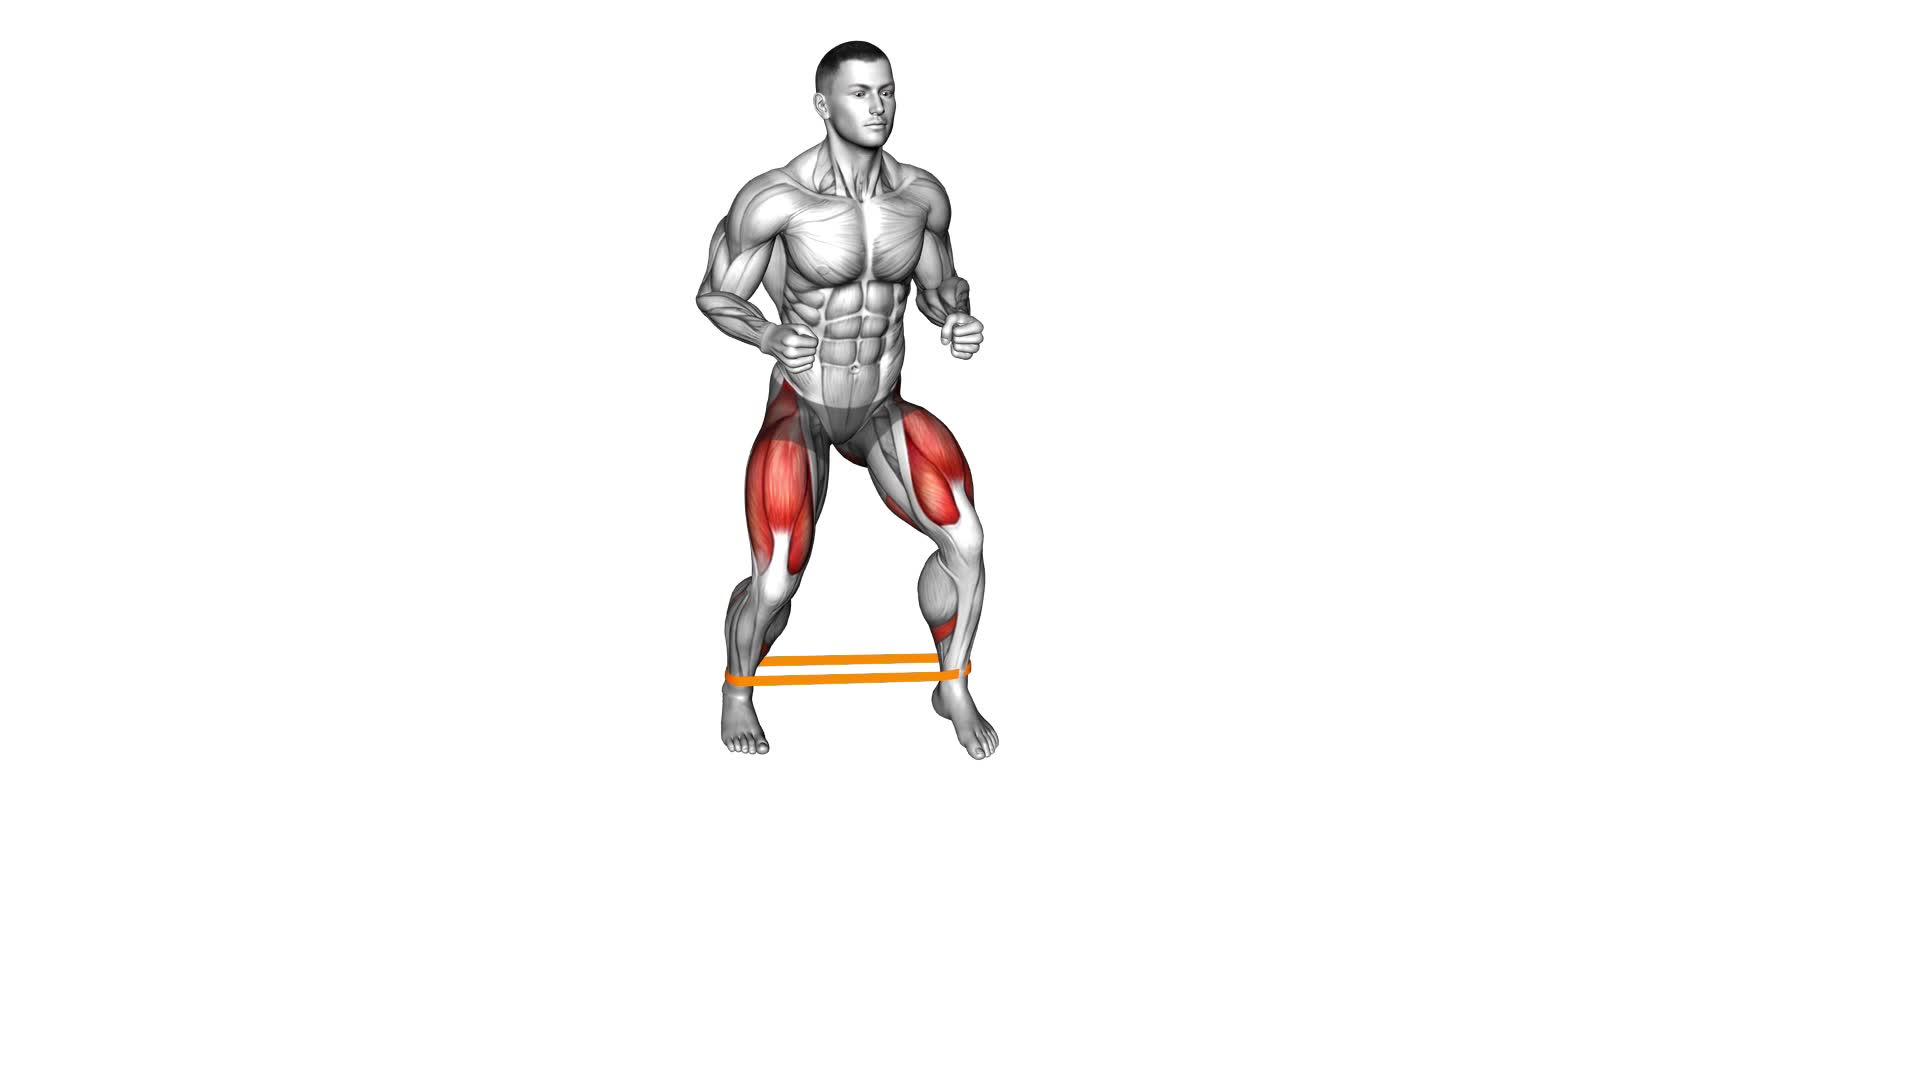 Resistance Band Monster Walk - Video Exercise Guide & Tips